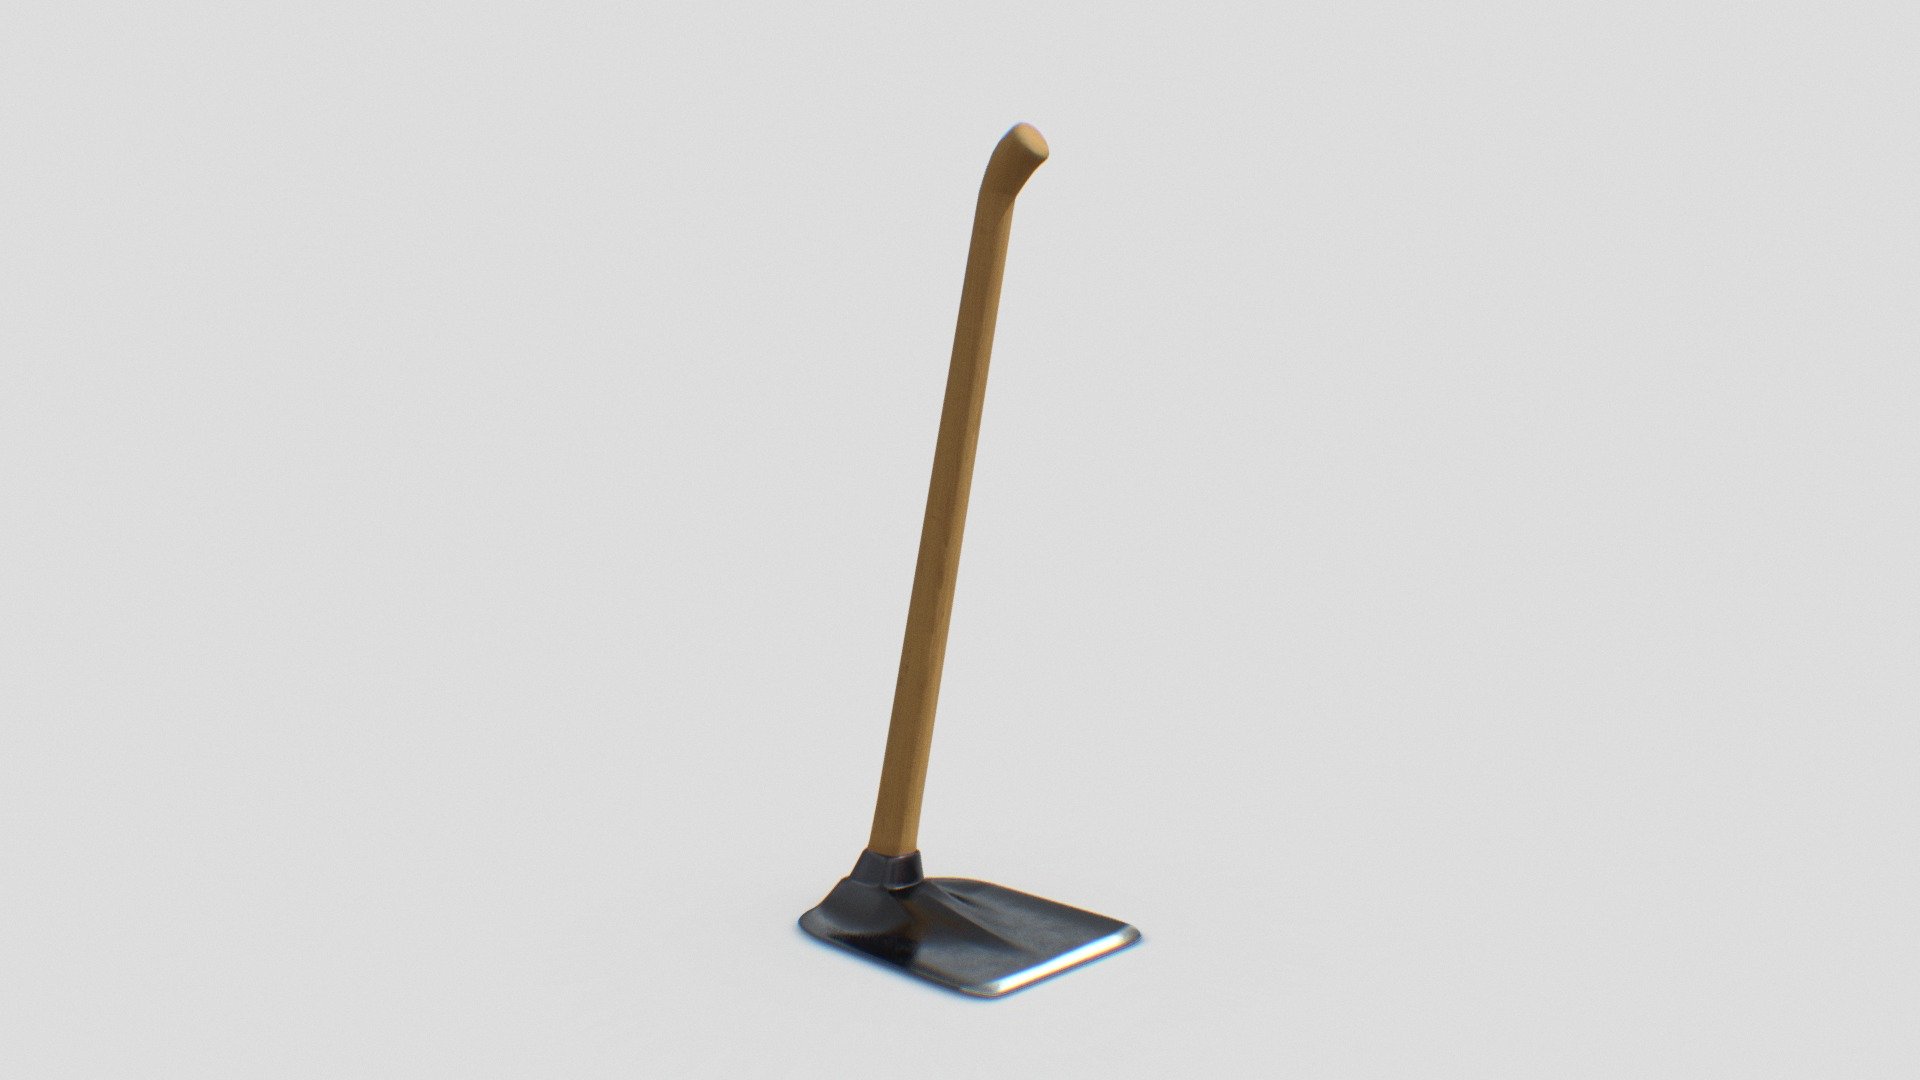 Wooden &amp; alumunium Garden Hoe


Actual size
Easy to edit
Easy to use
Ready to import in realtime render software and game engine
Avaiable in multiple format 

Please like and share if you like my work - Garden Hoe LP - Buy Royalty Free 3D model by robertrestupambudi 3d model